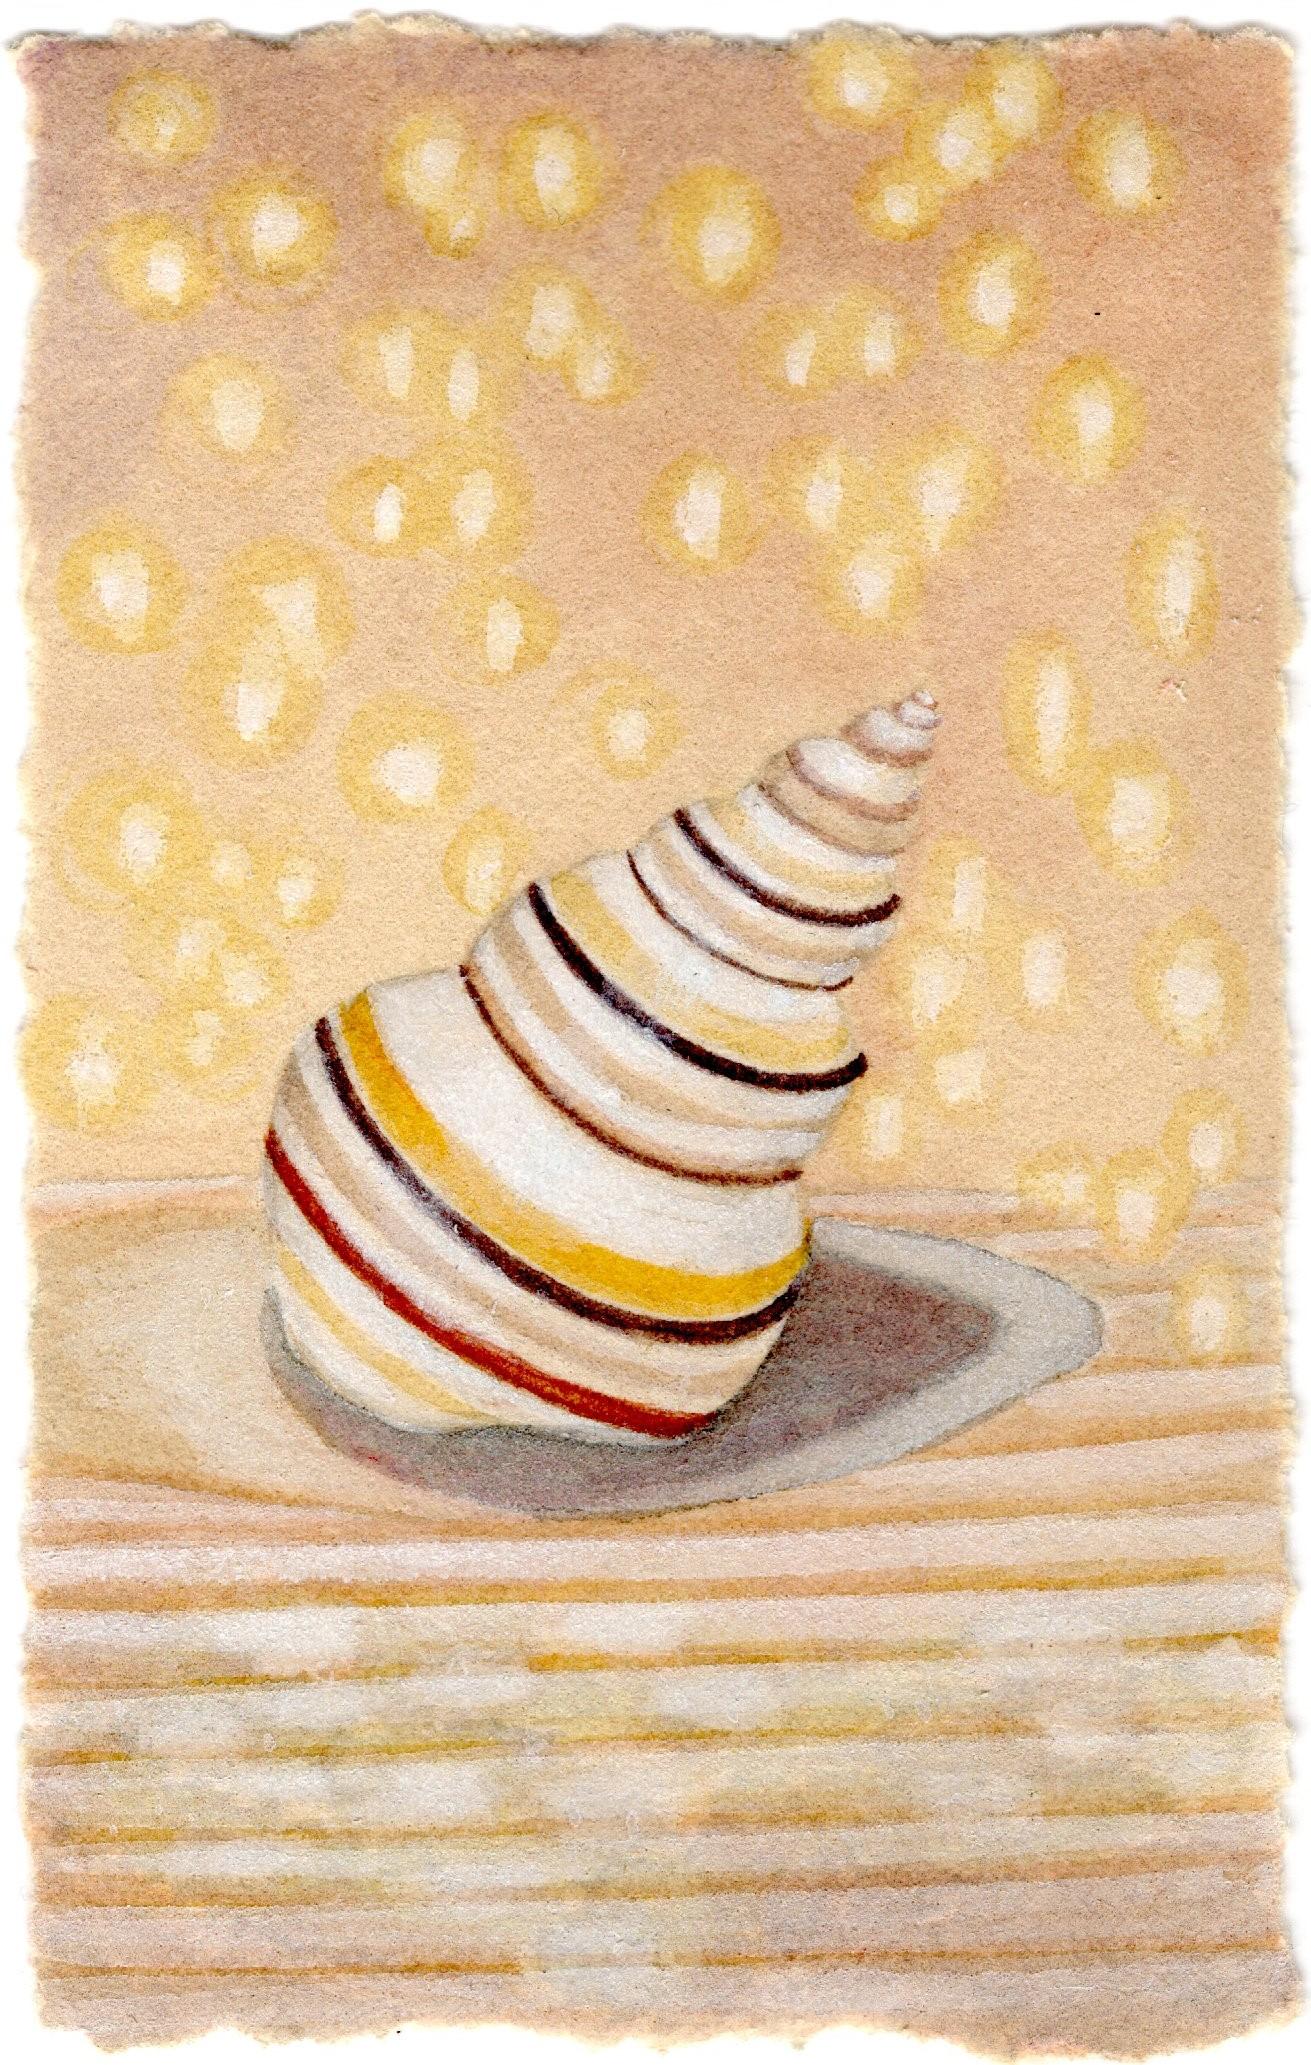 Christina Haglid Landscape Art - Candy Stripe - Original Painting of a Tiny Red and Yellow Striped Sea Shell